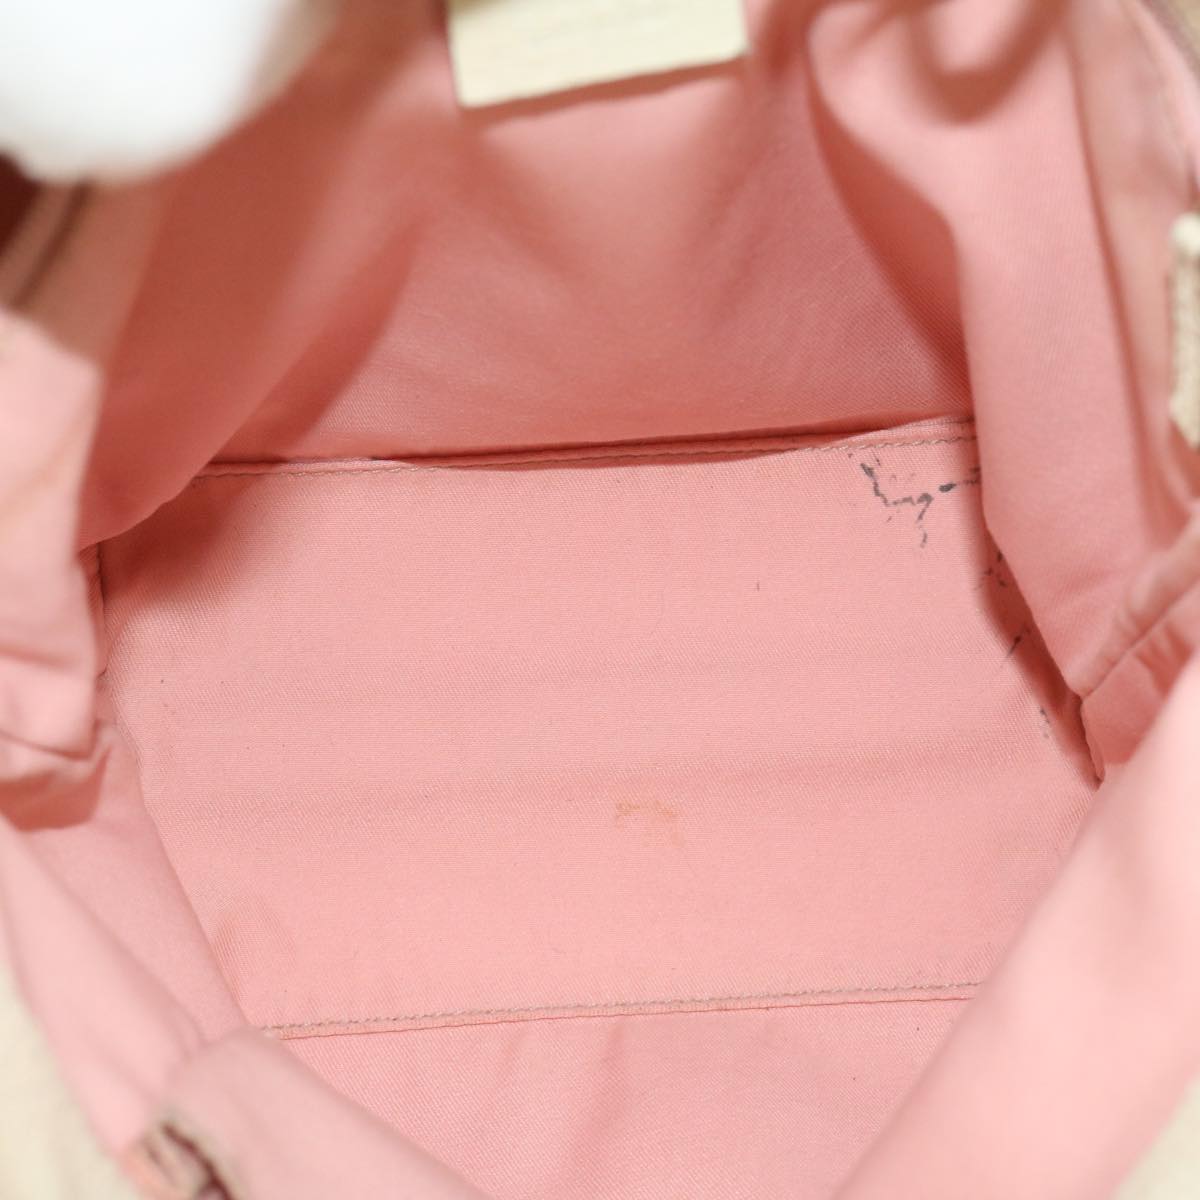 GUCCI GG Canvas Tote Bag Pink Auth am2713g